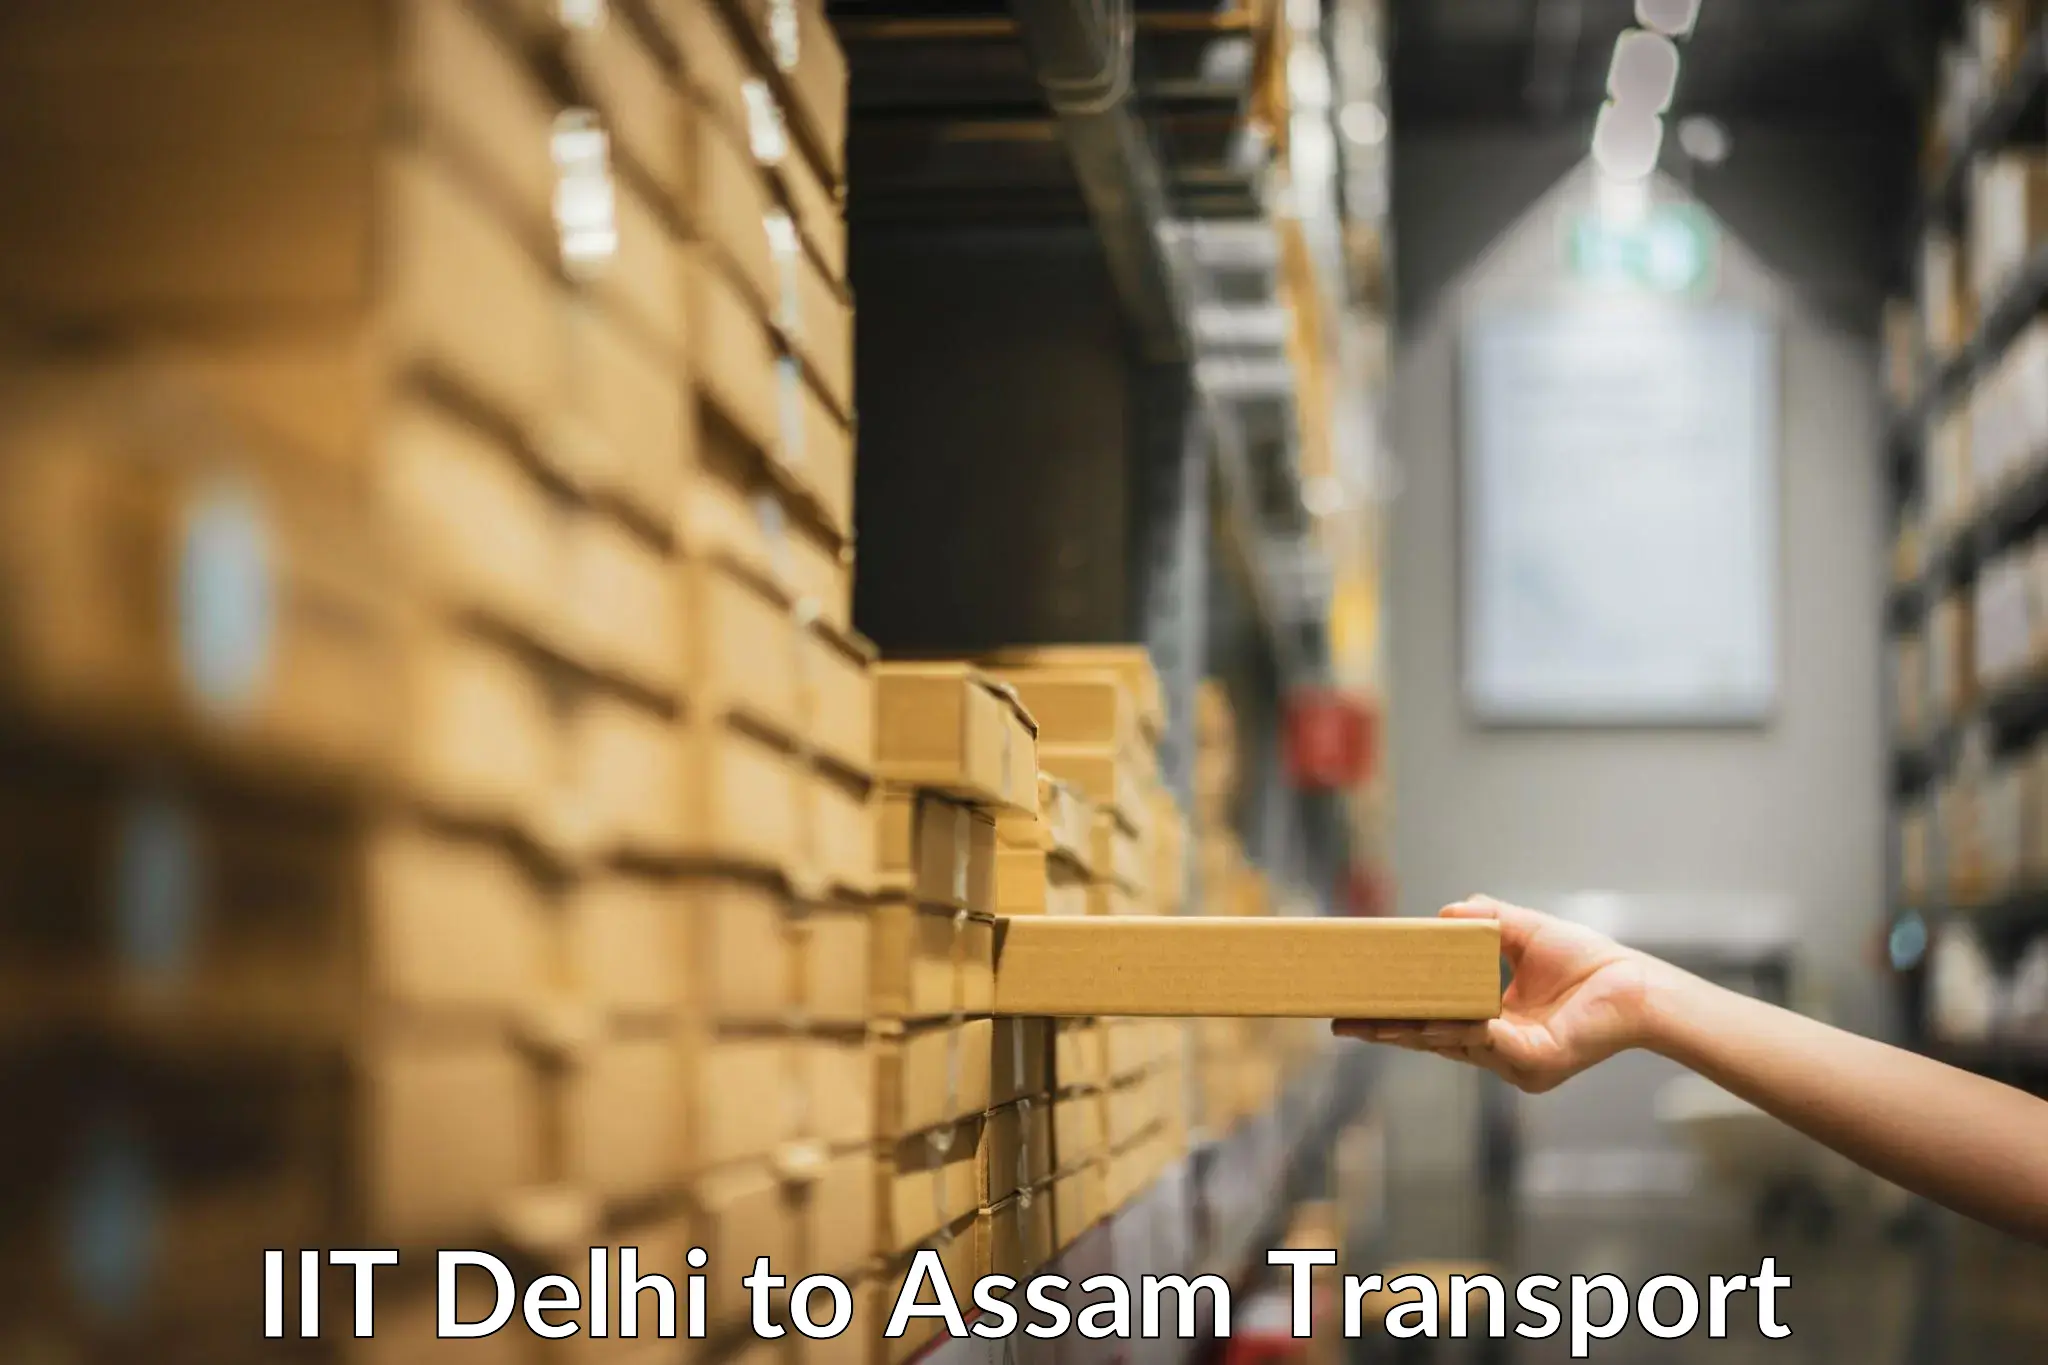 Road transport services in IIT Delhi to Lala Assam